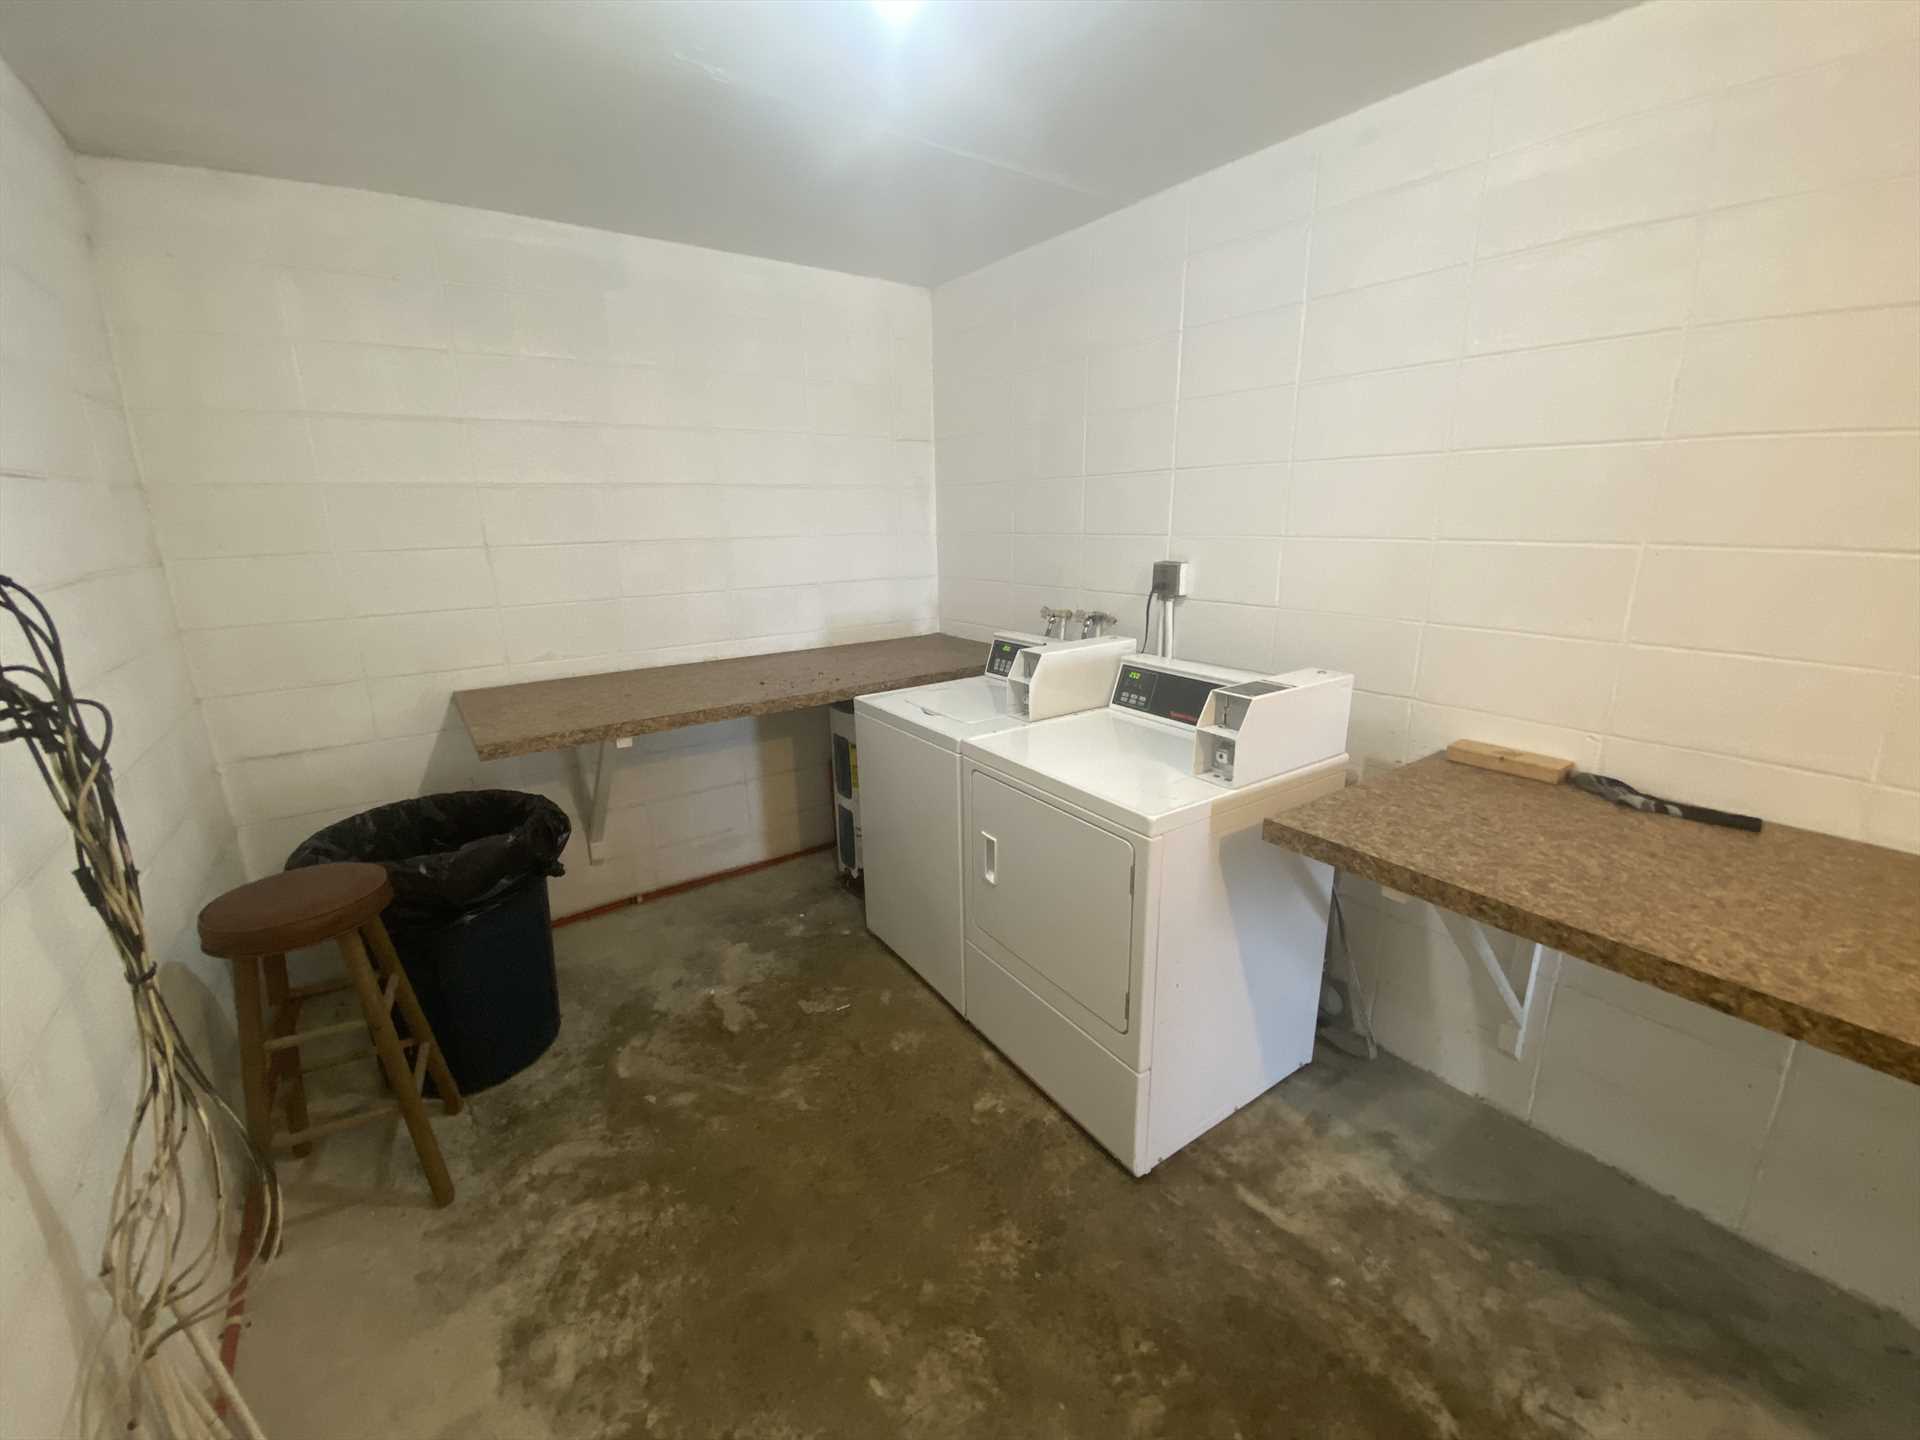 Laundry room available on-site (pay service).